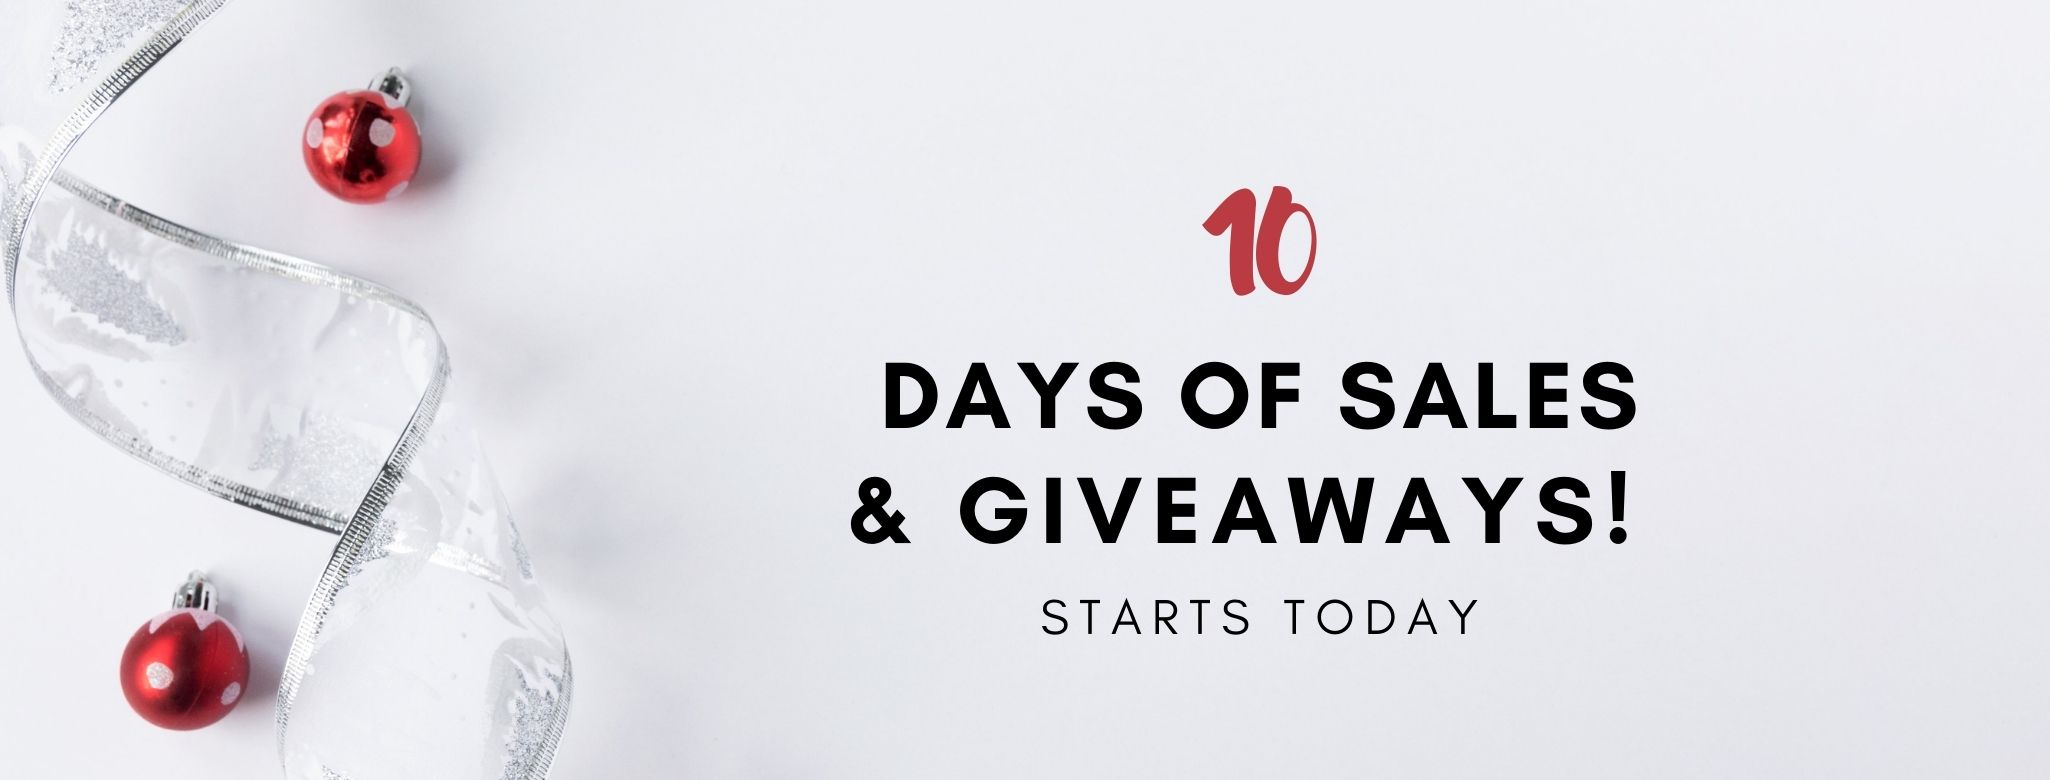 10 Days of Sales & Giveaways ?